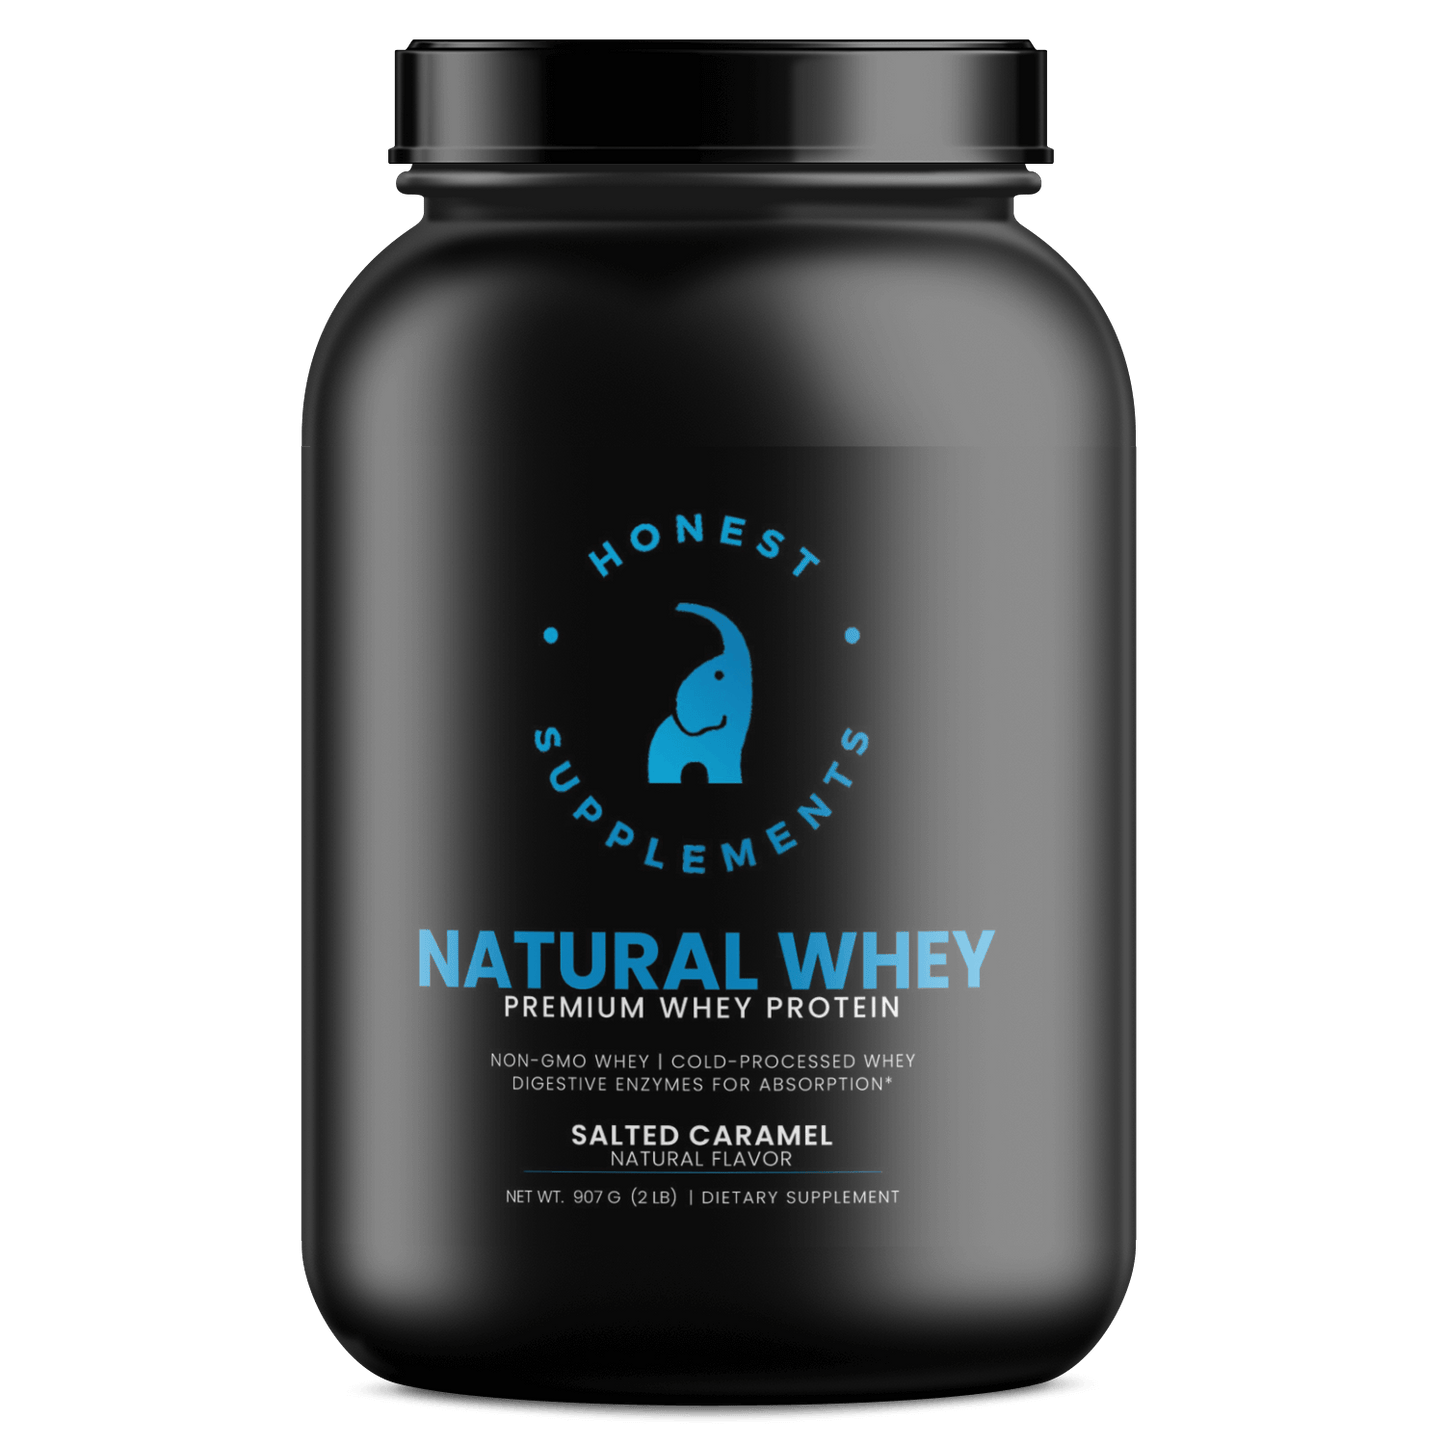 Natural Whey Premium Whey Protein - Salted Caramel